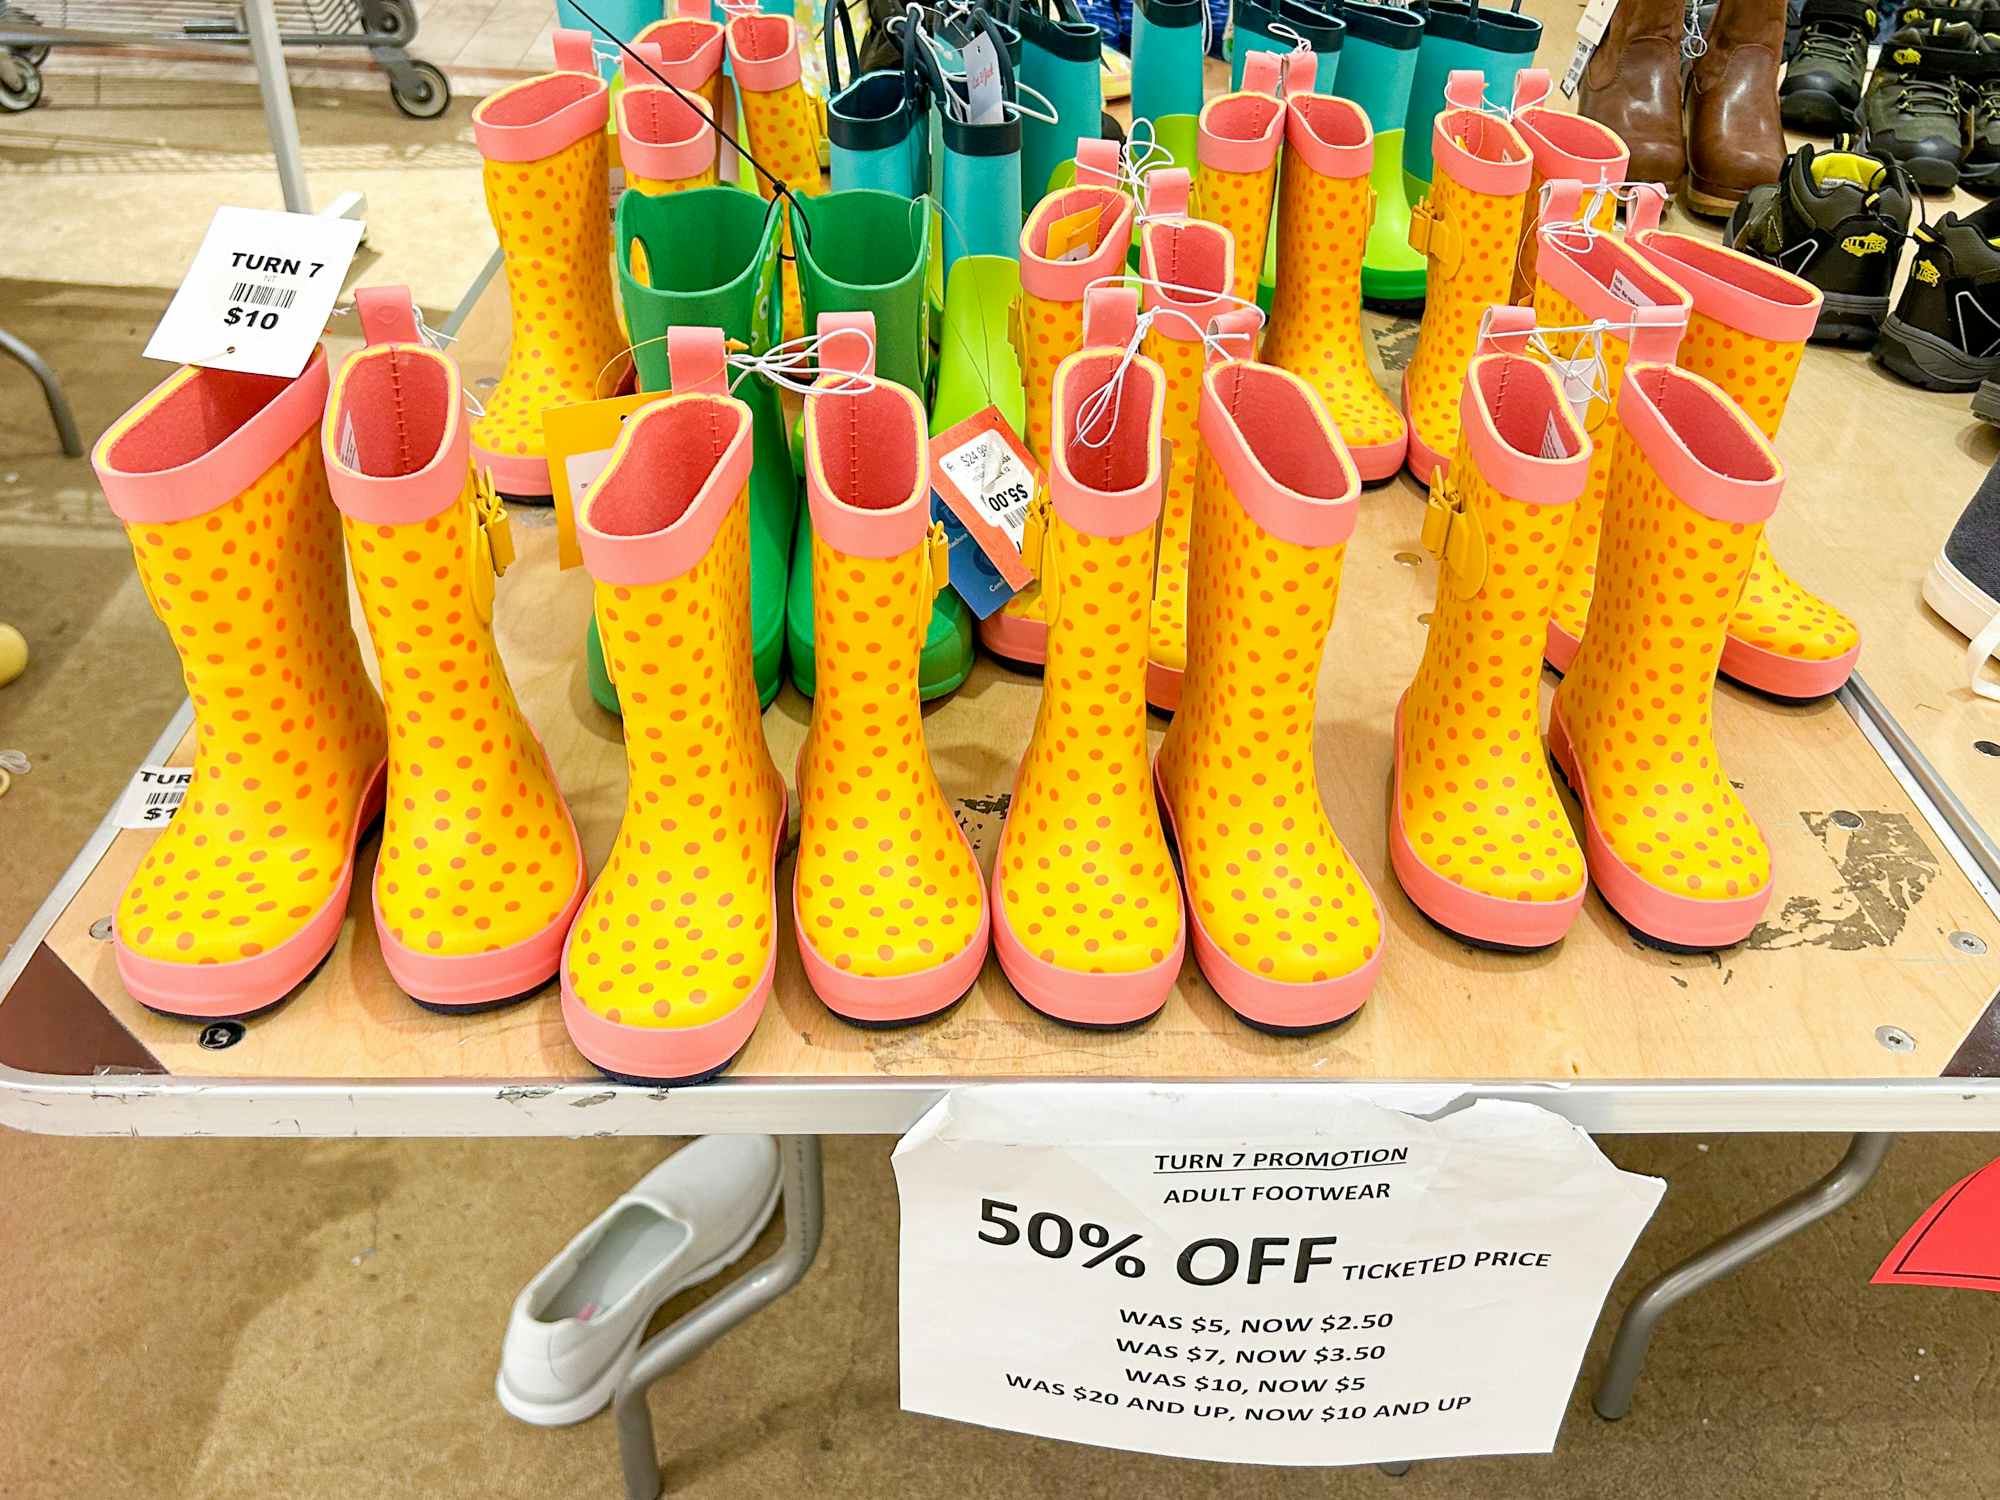 Some rain boots on a table with a 50% off sign